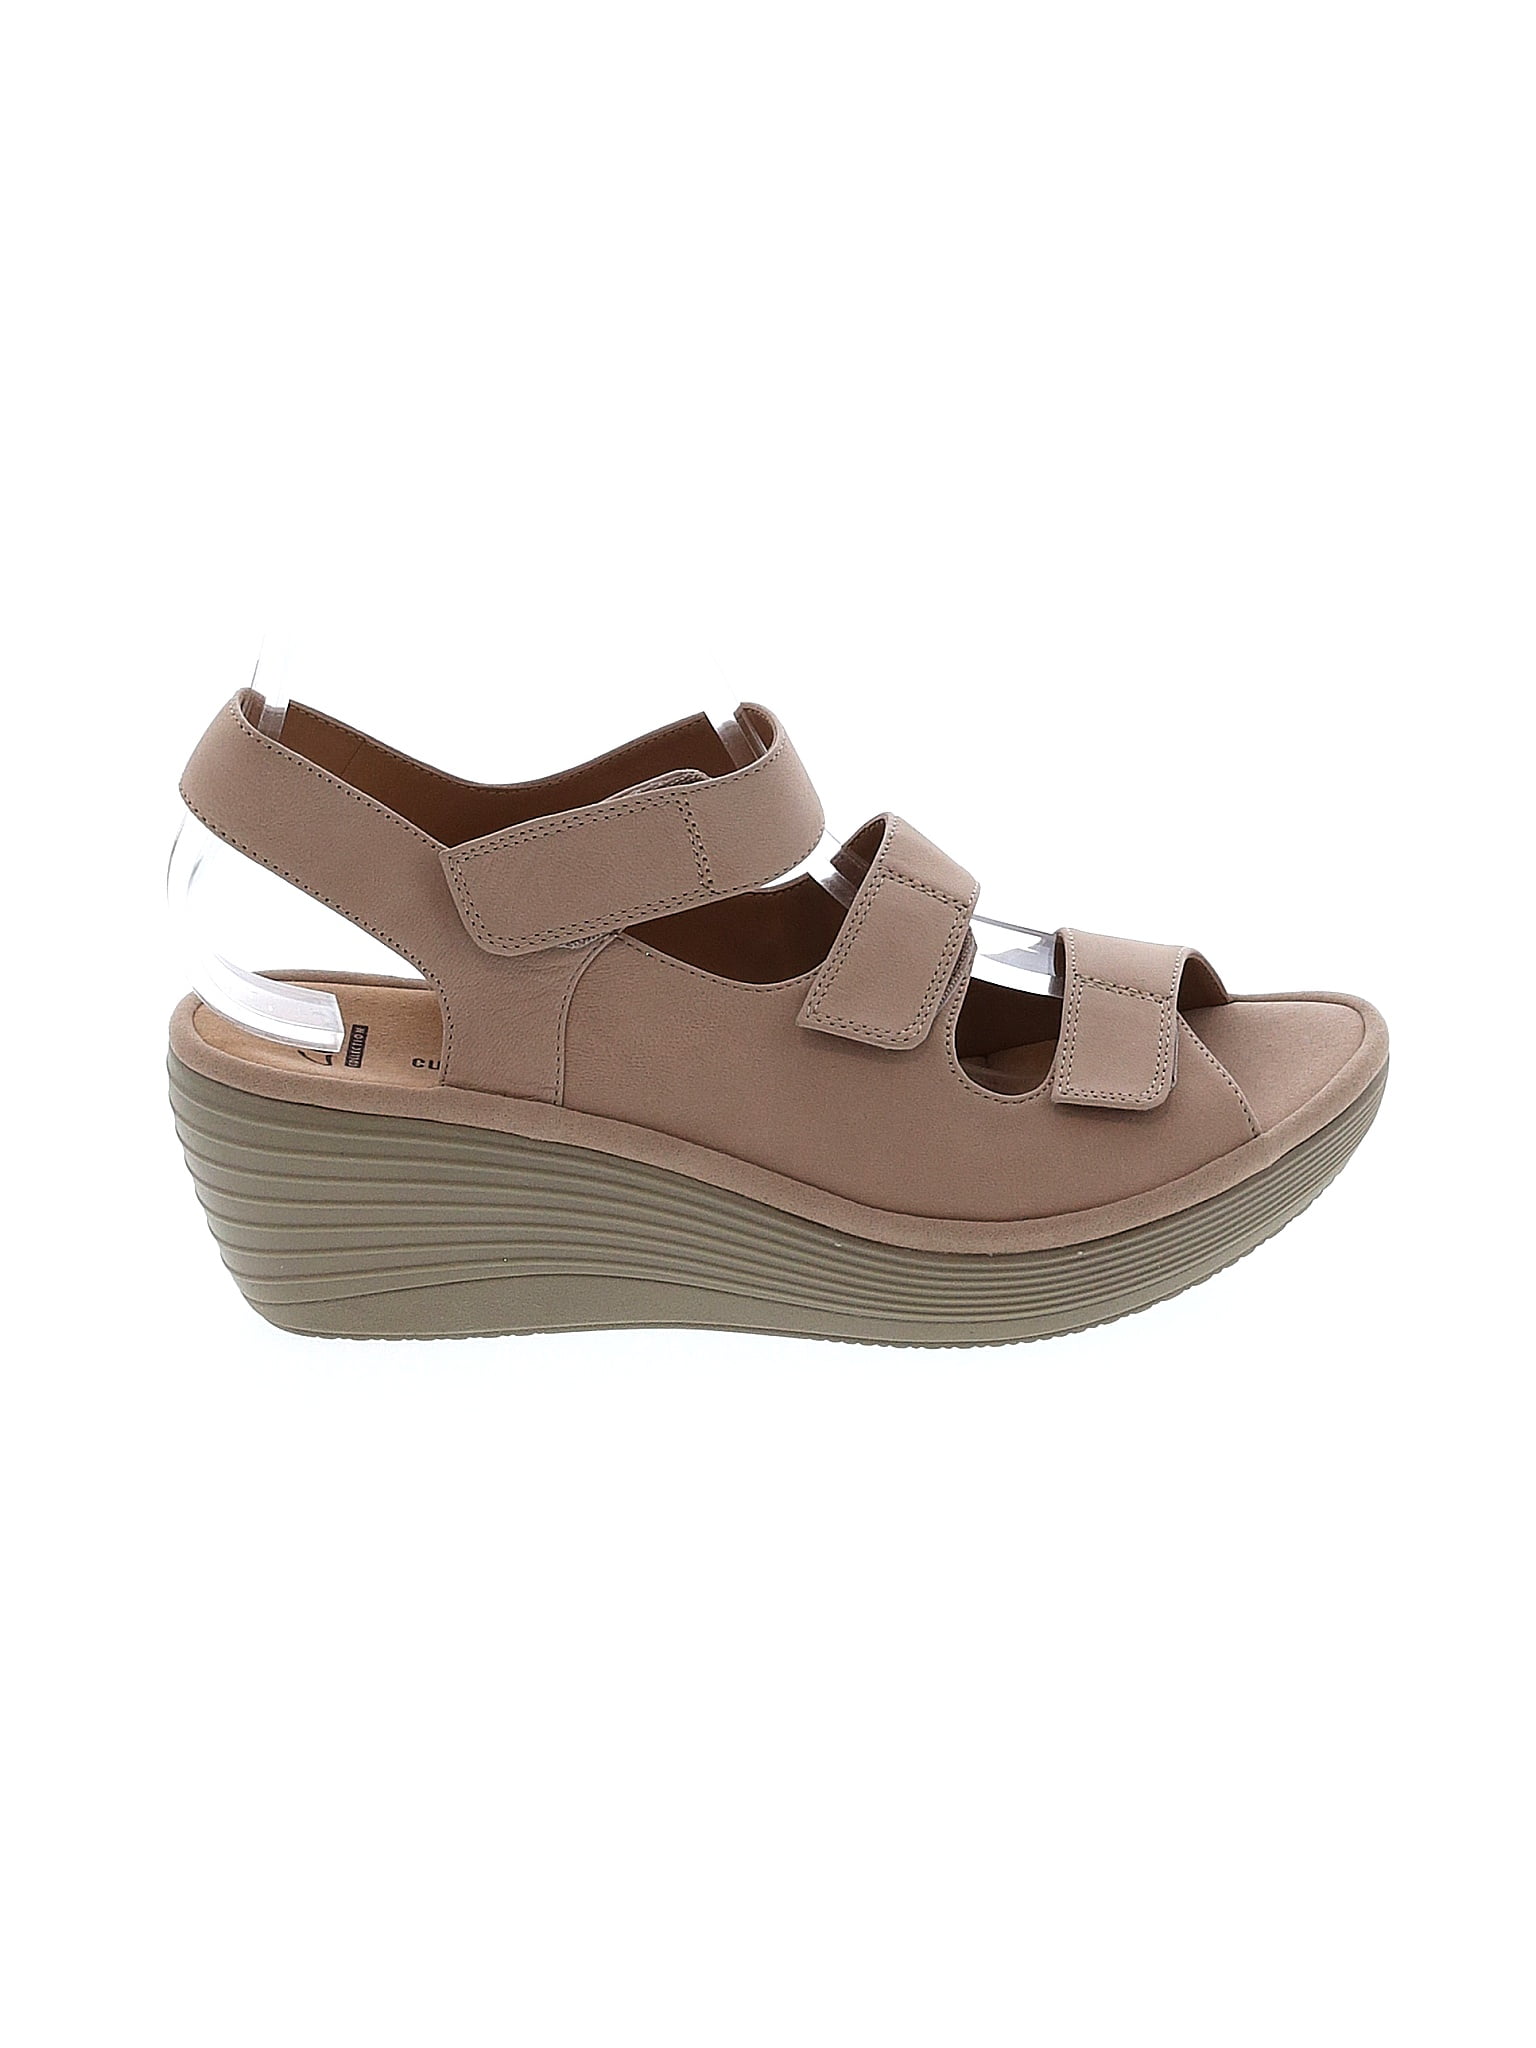 Clarks Solid Brown Tan Wedges Size 10 - 68% off